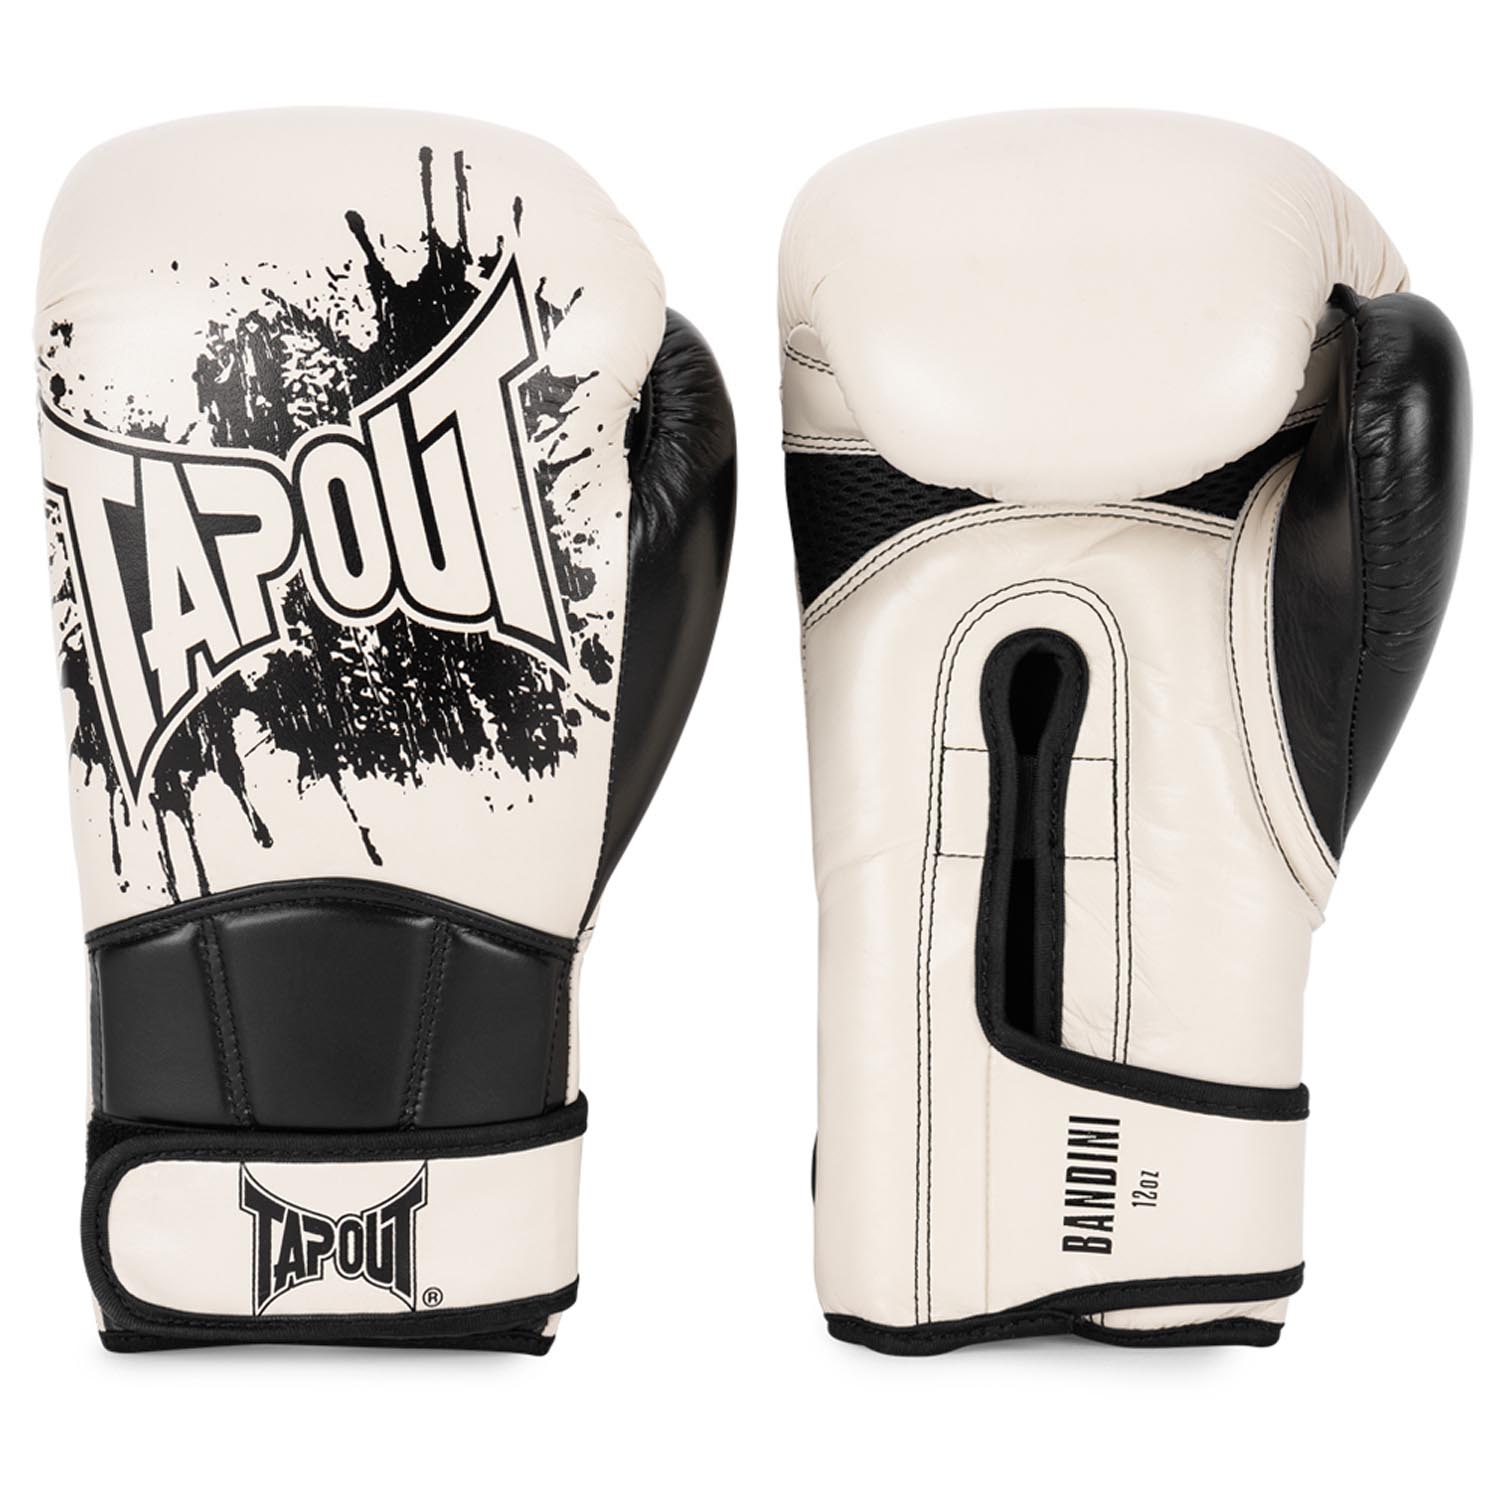 Tapout Boxing Gloves, Bandini